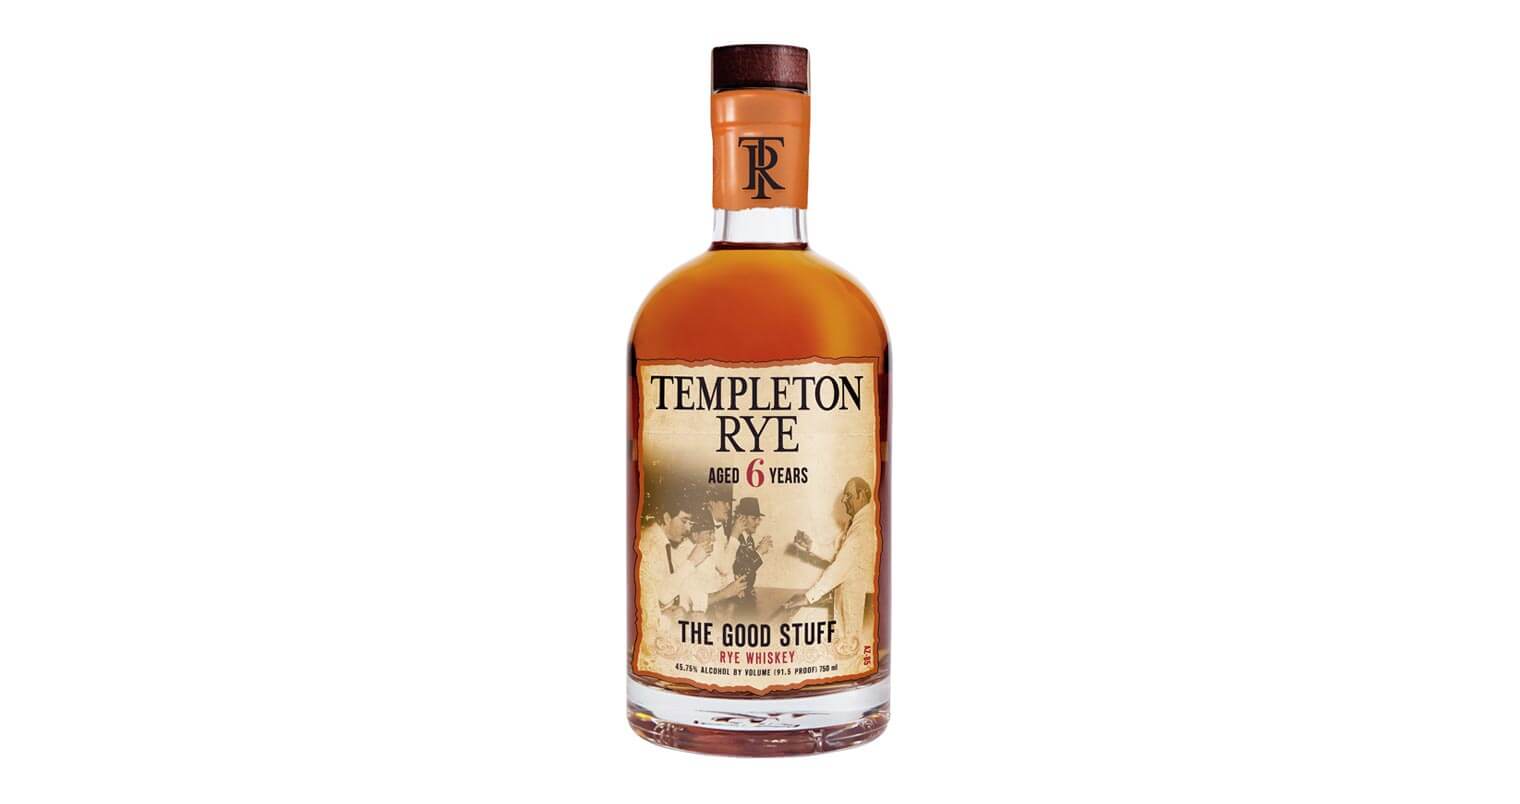 Templeton Rye 6 Year Old Debuts, featured image